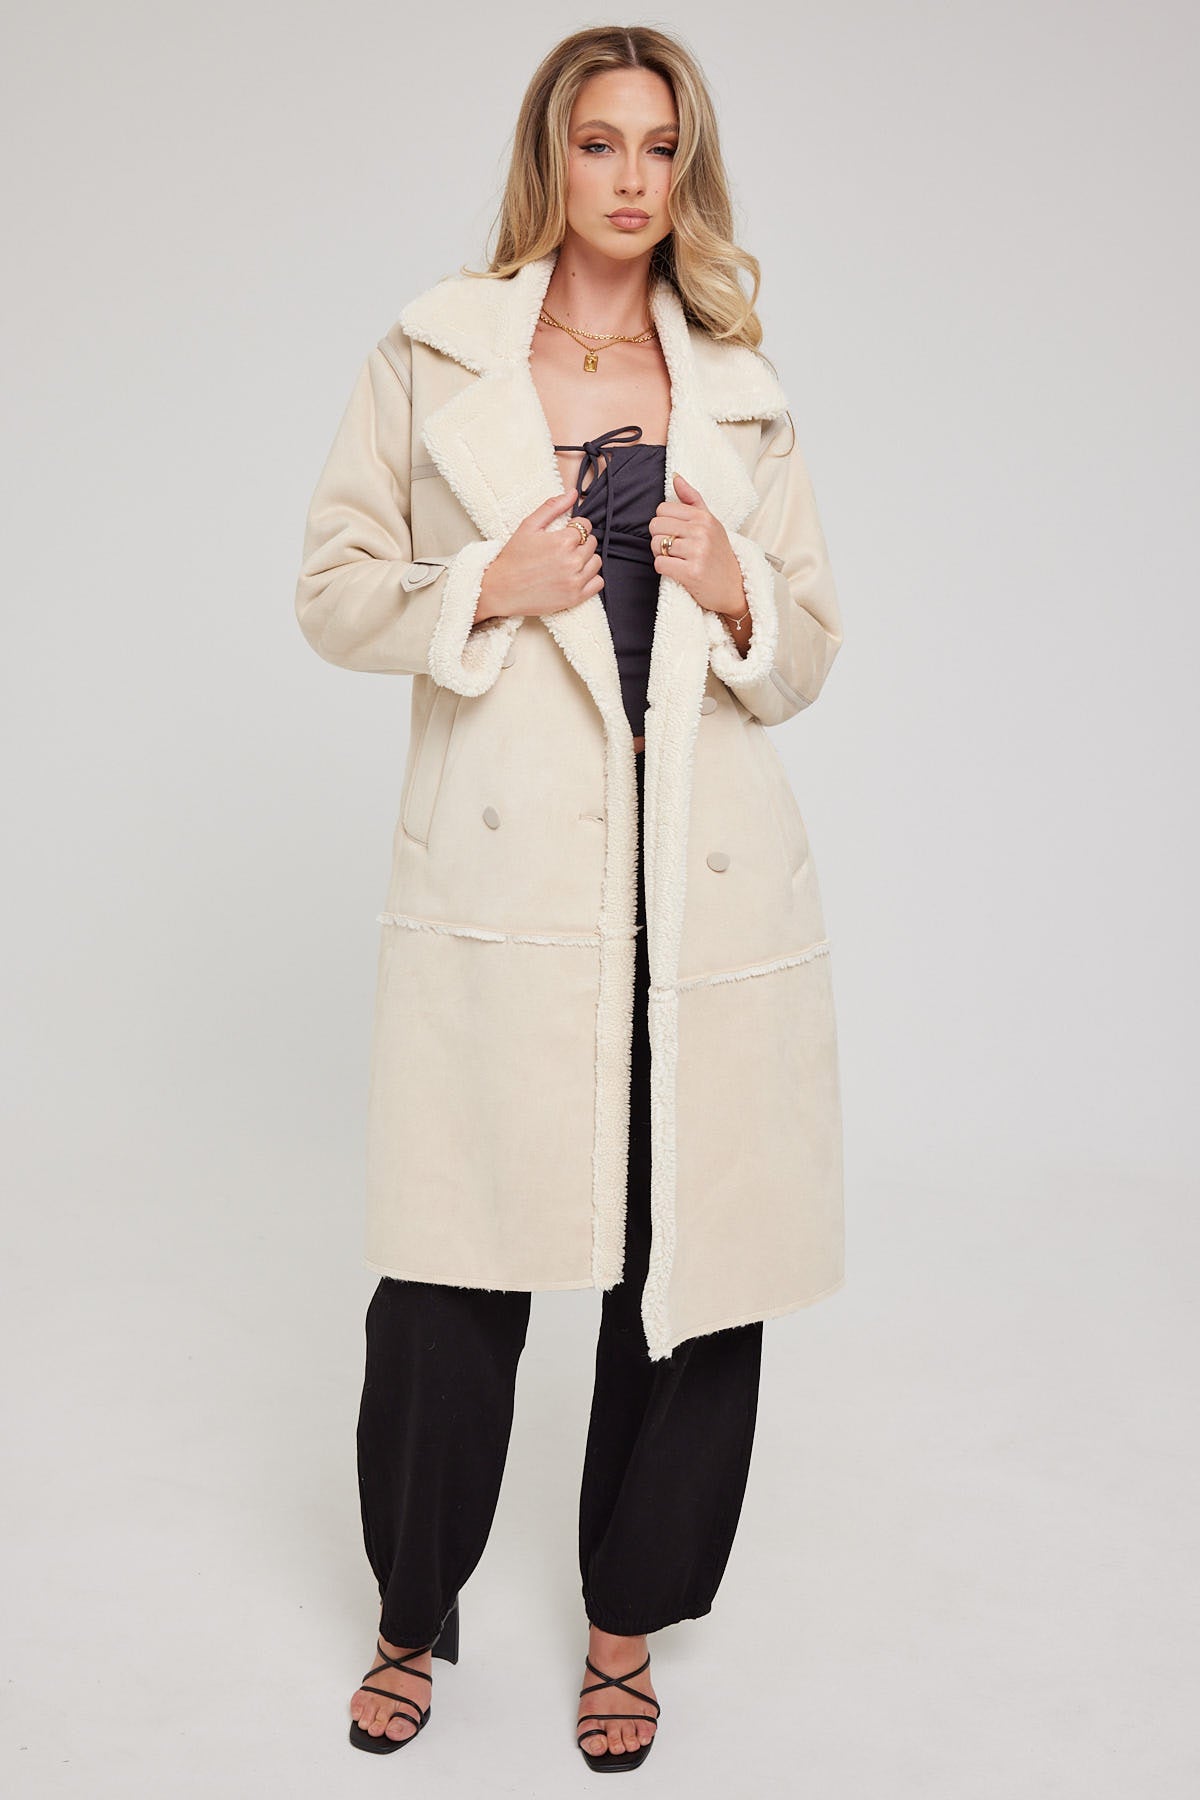 All About Eve Mia Sherpa Coat Natural